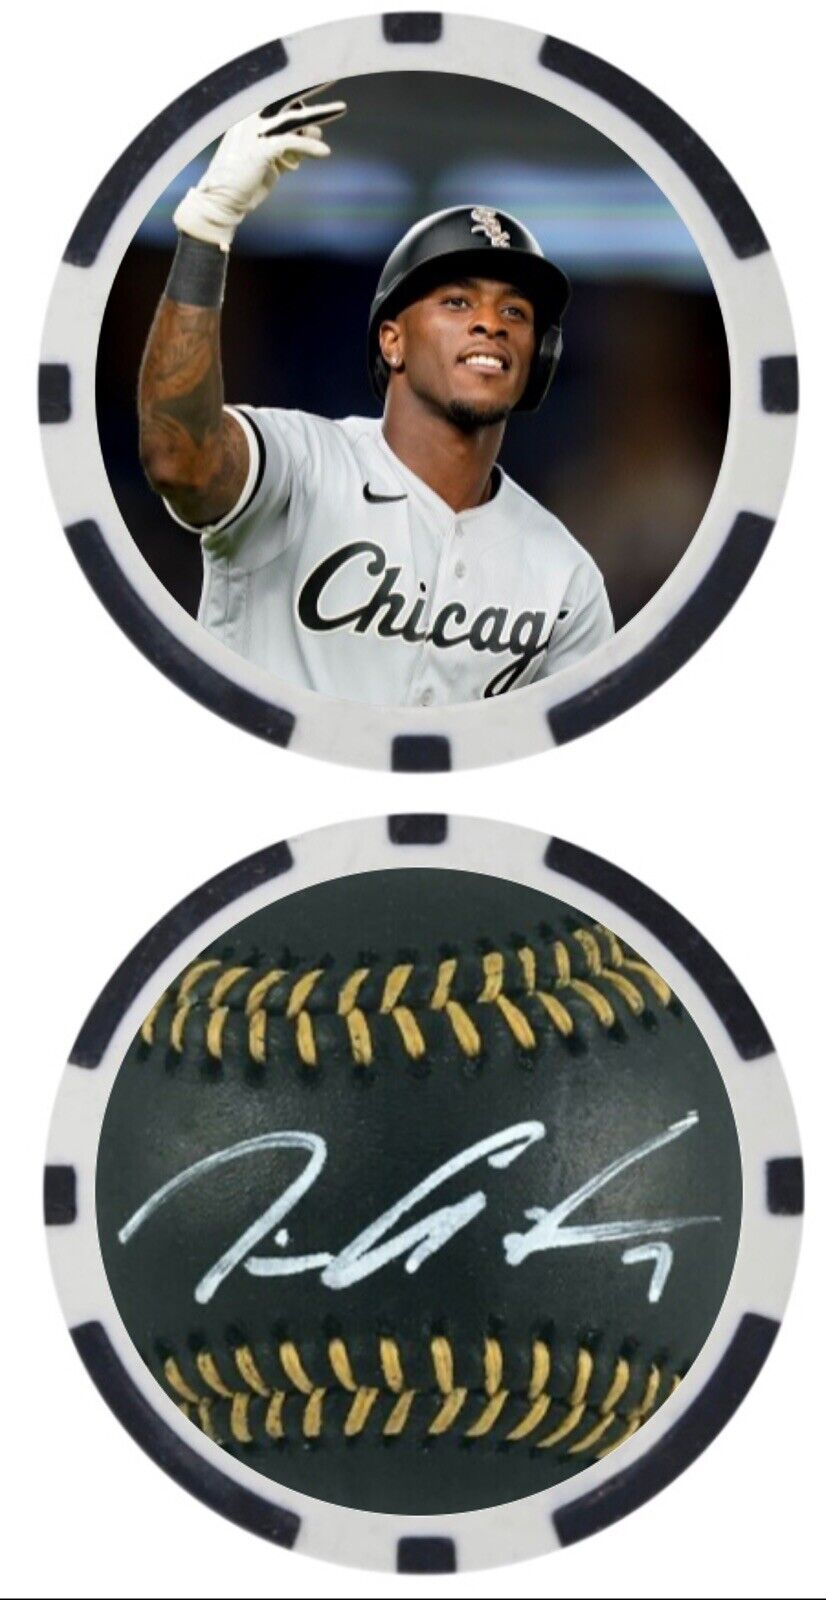 TIM ANDERSON - CHICAGO WHITE SOX - GOLF BALL MARKER / POKER CHIP ***SIGNED***